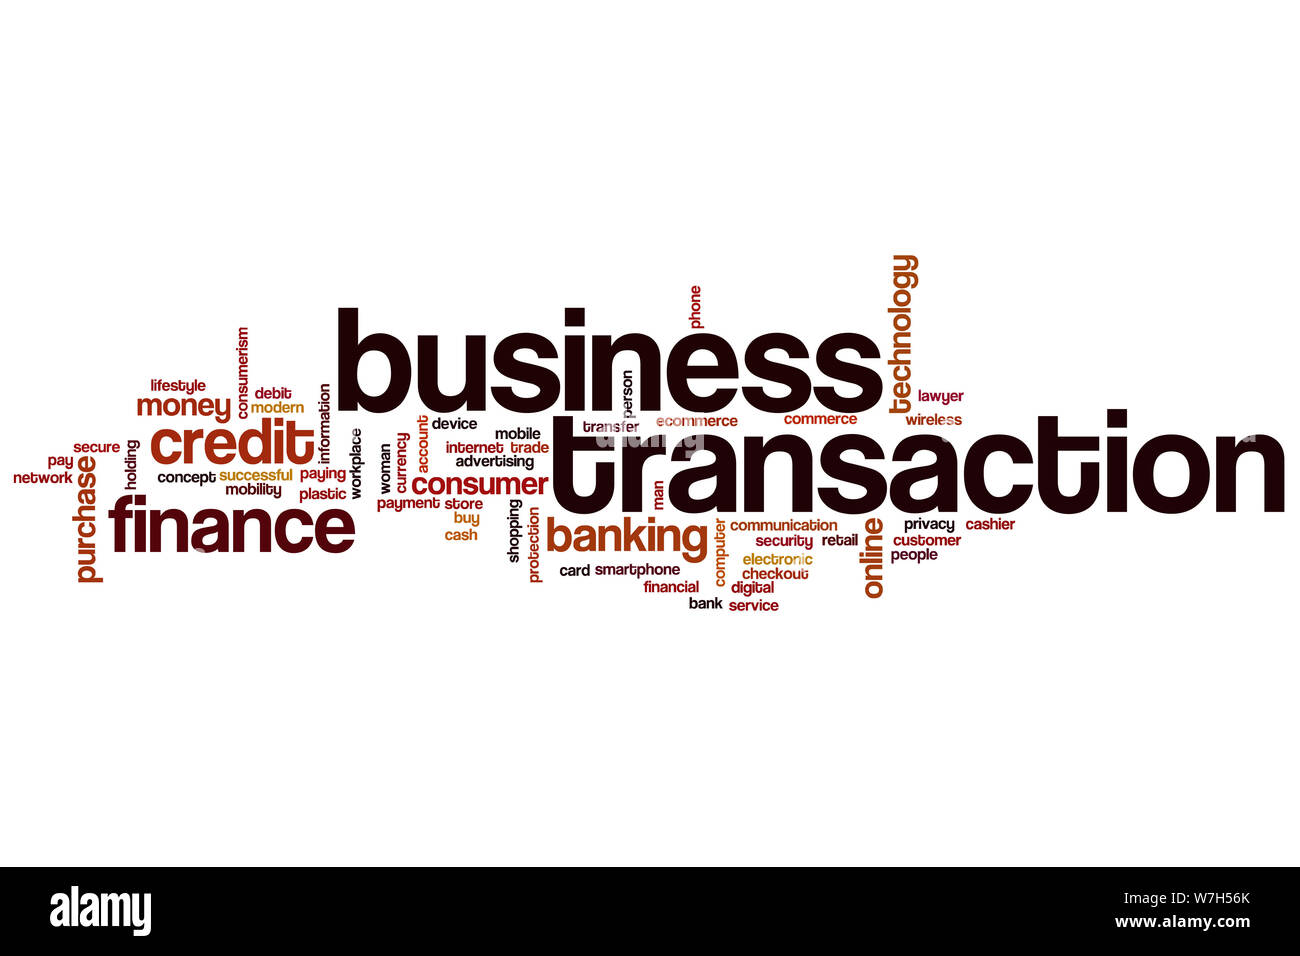 Business transaction word cloud Stock Photo